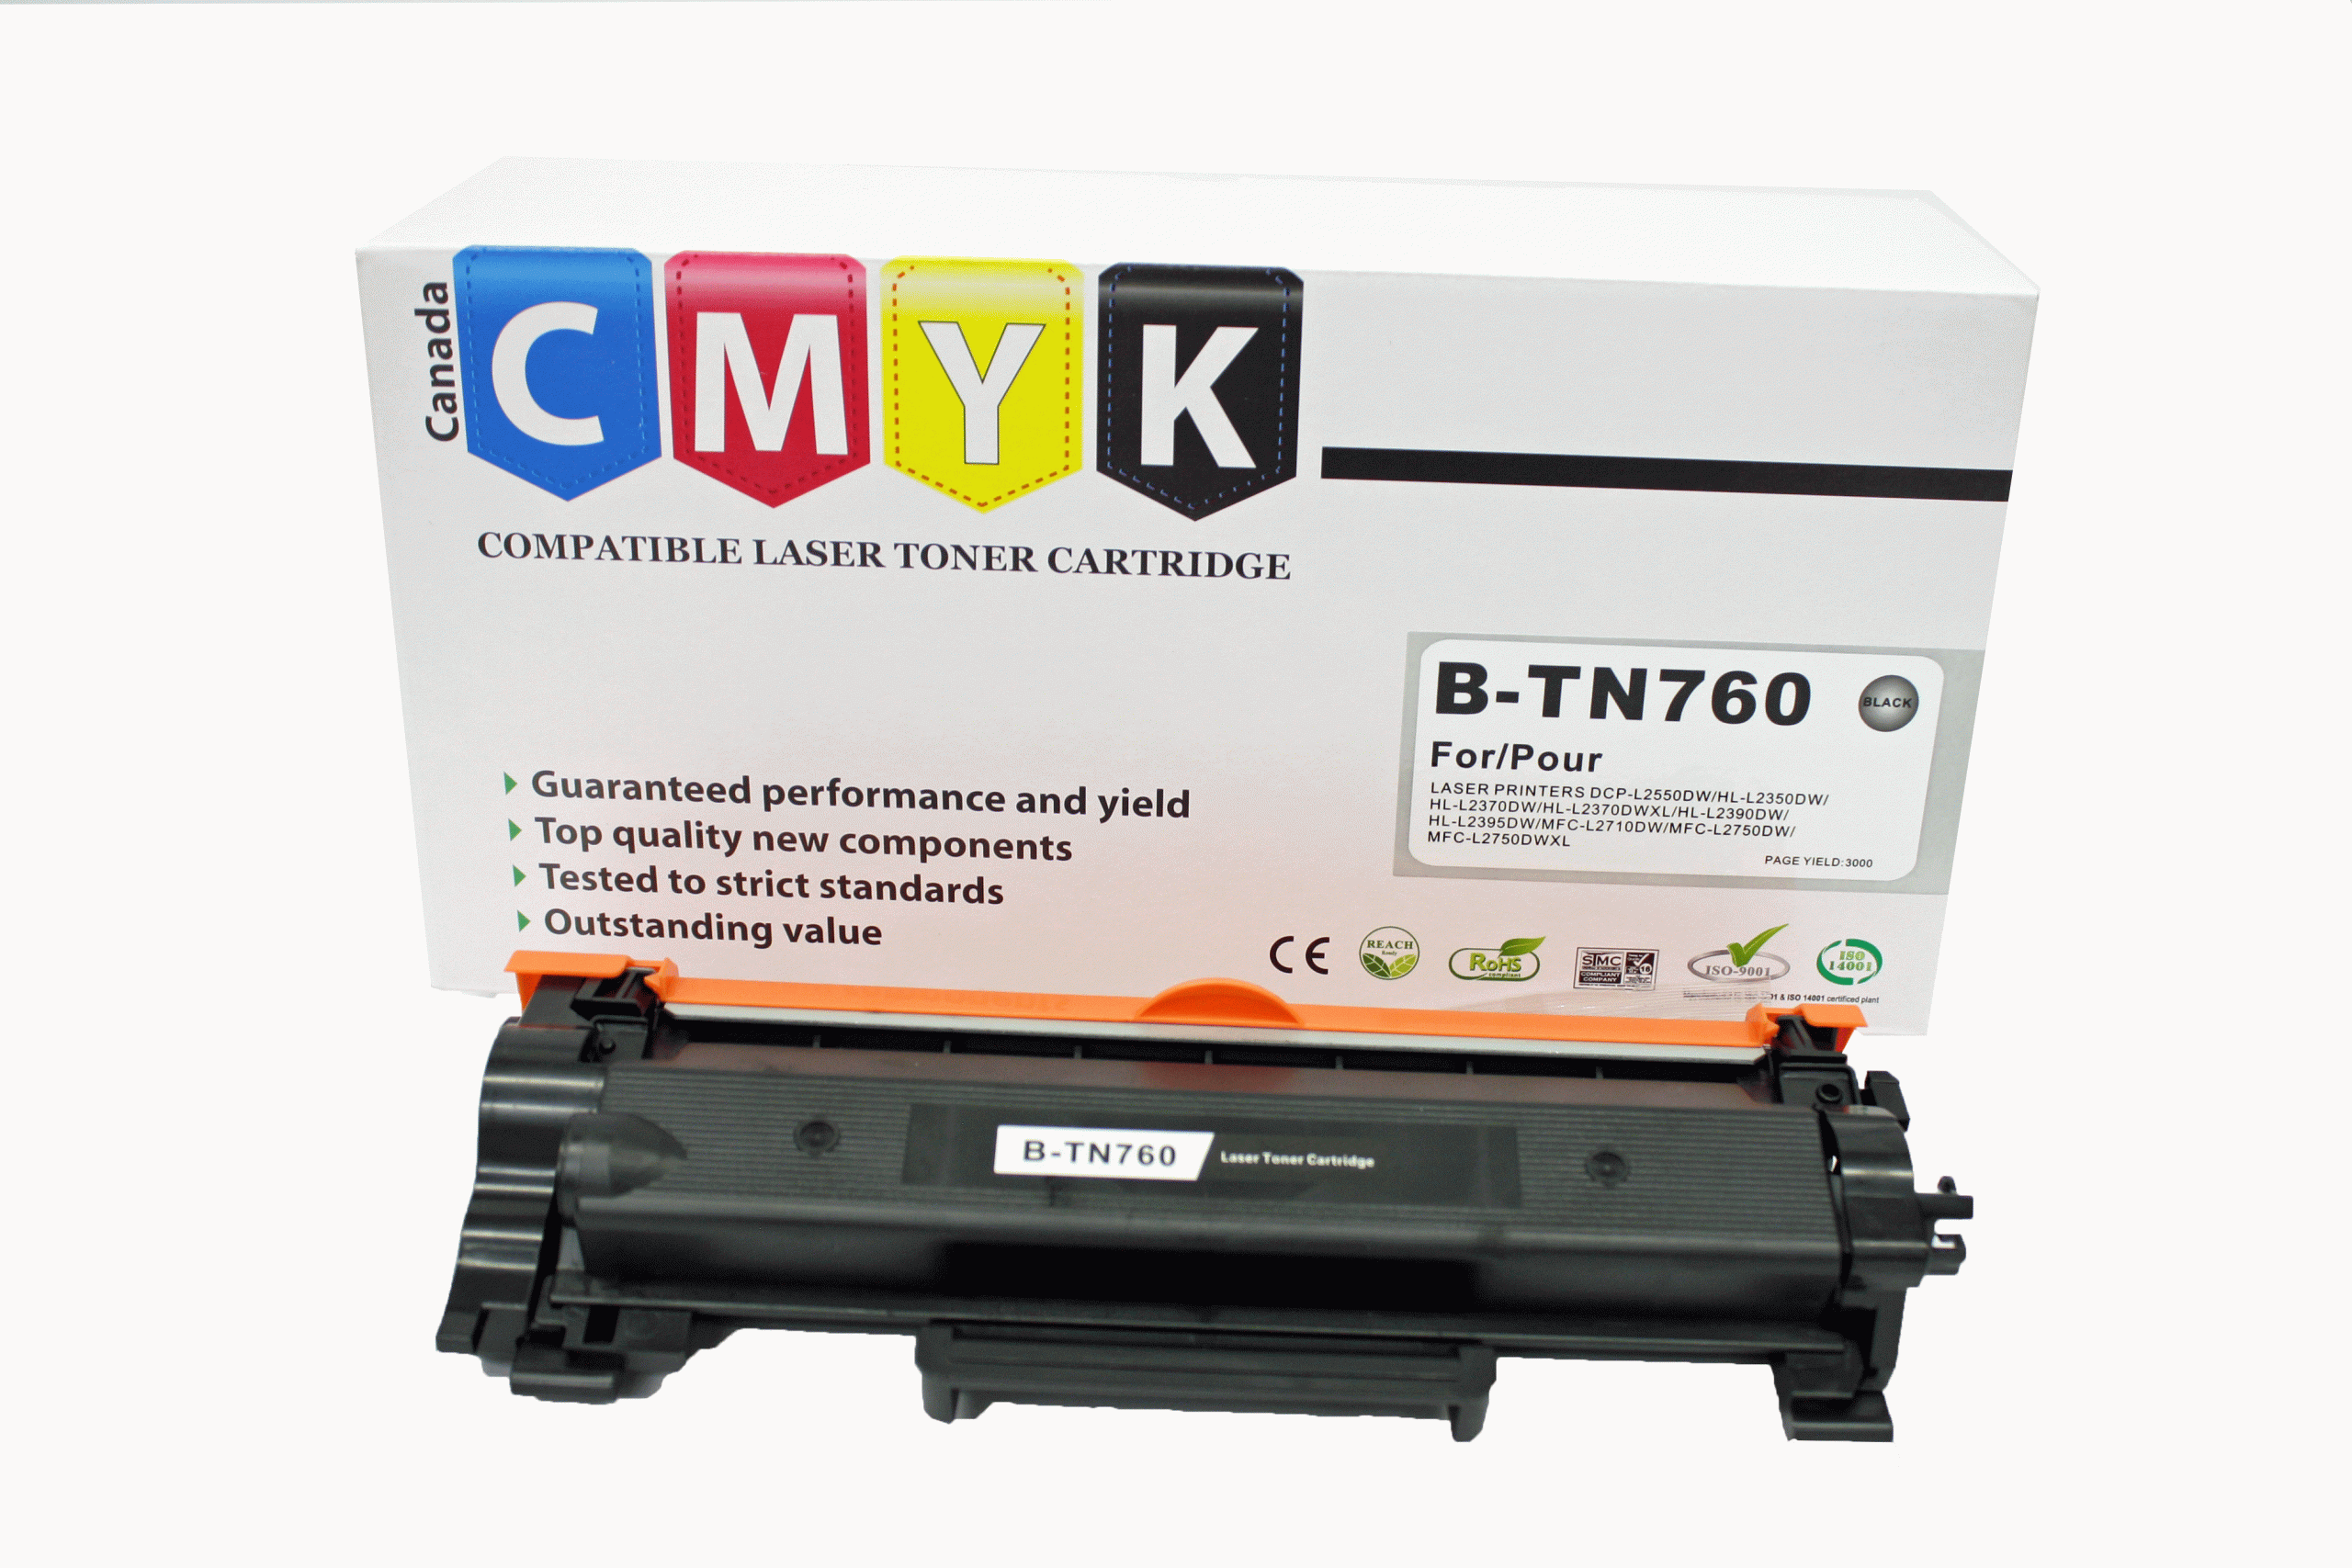 TN760 Toner Cartridge Compatible for Brother MFC-L2710DW MFC